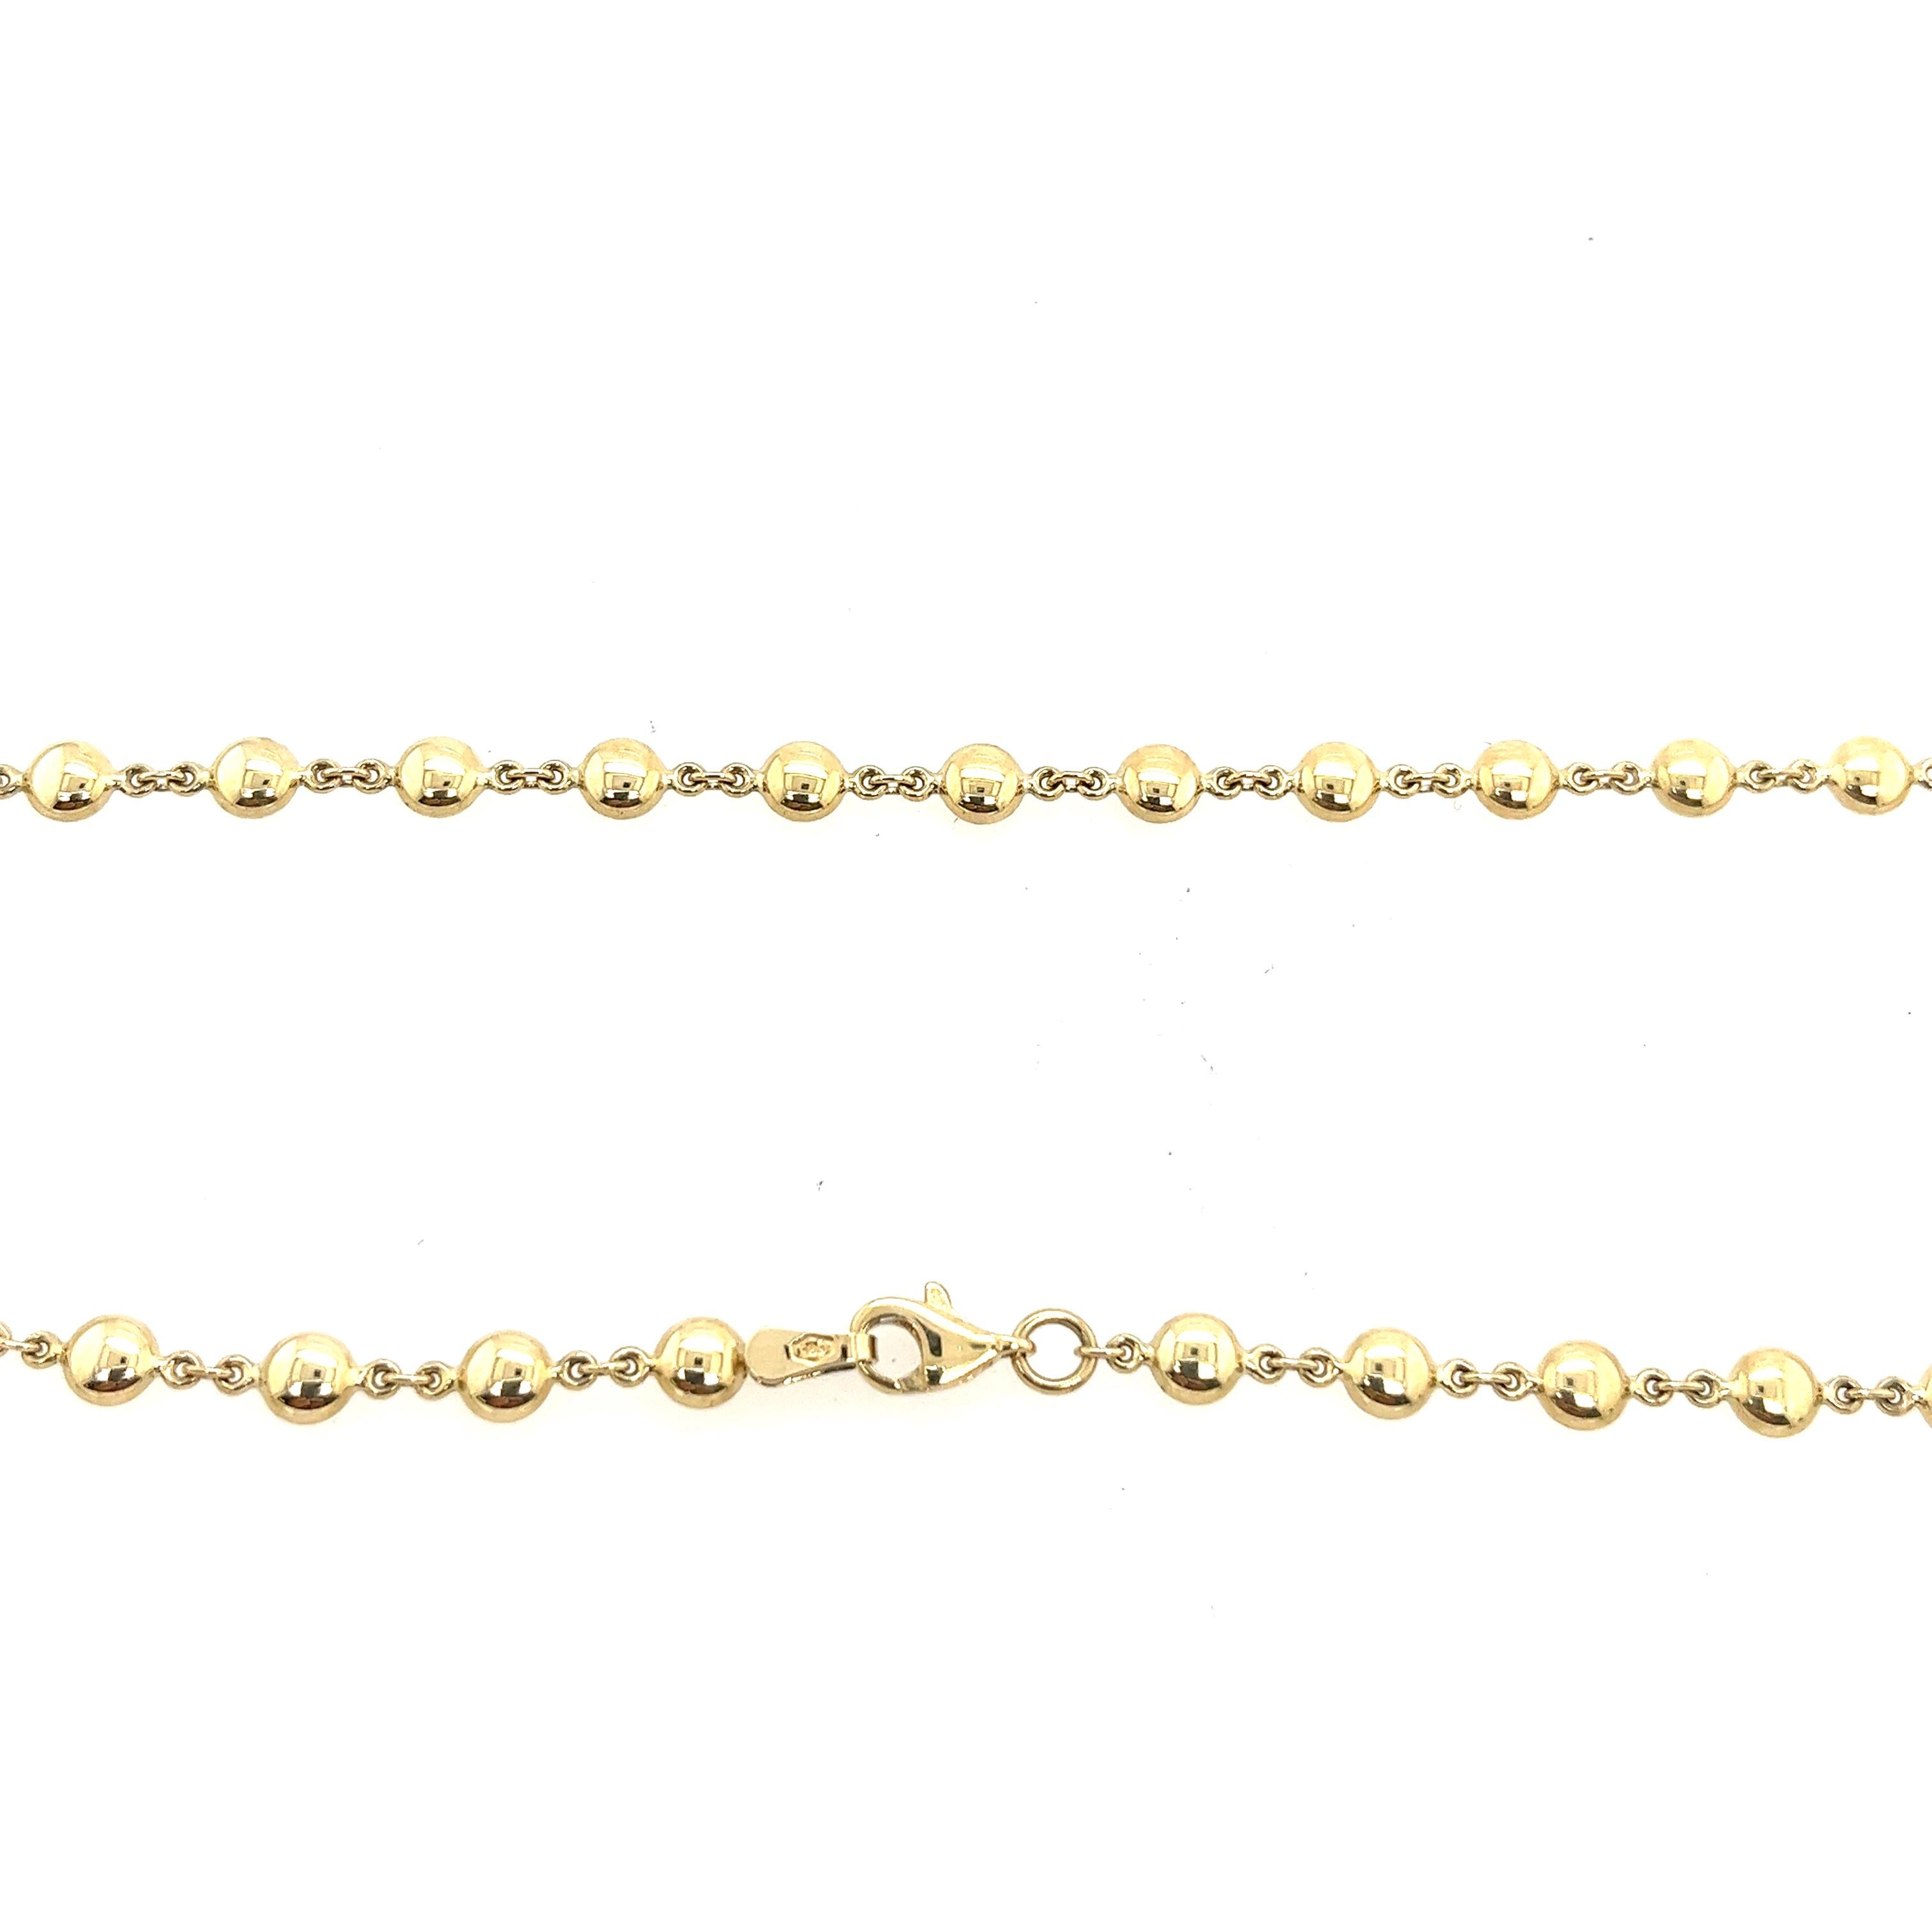 New solid 14ct yellow gold Italian ball/bead chain classic necklace.
This bead chain is the perfect choice for anyone looking to add a touch of luxury to their jewellery collection, is a perfect gift for the one you love and can be worn with any